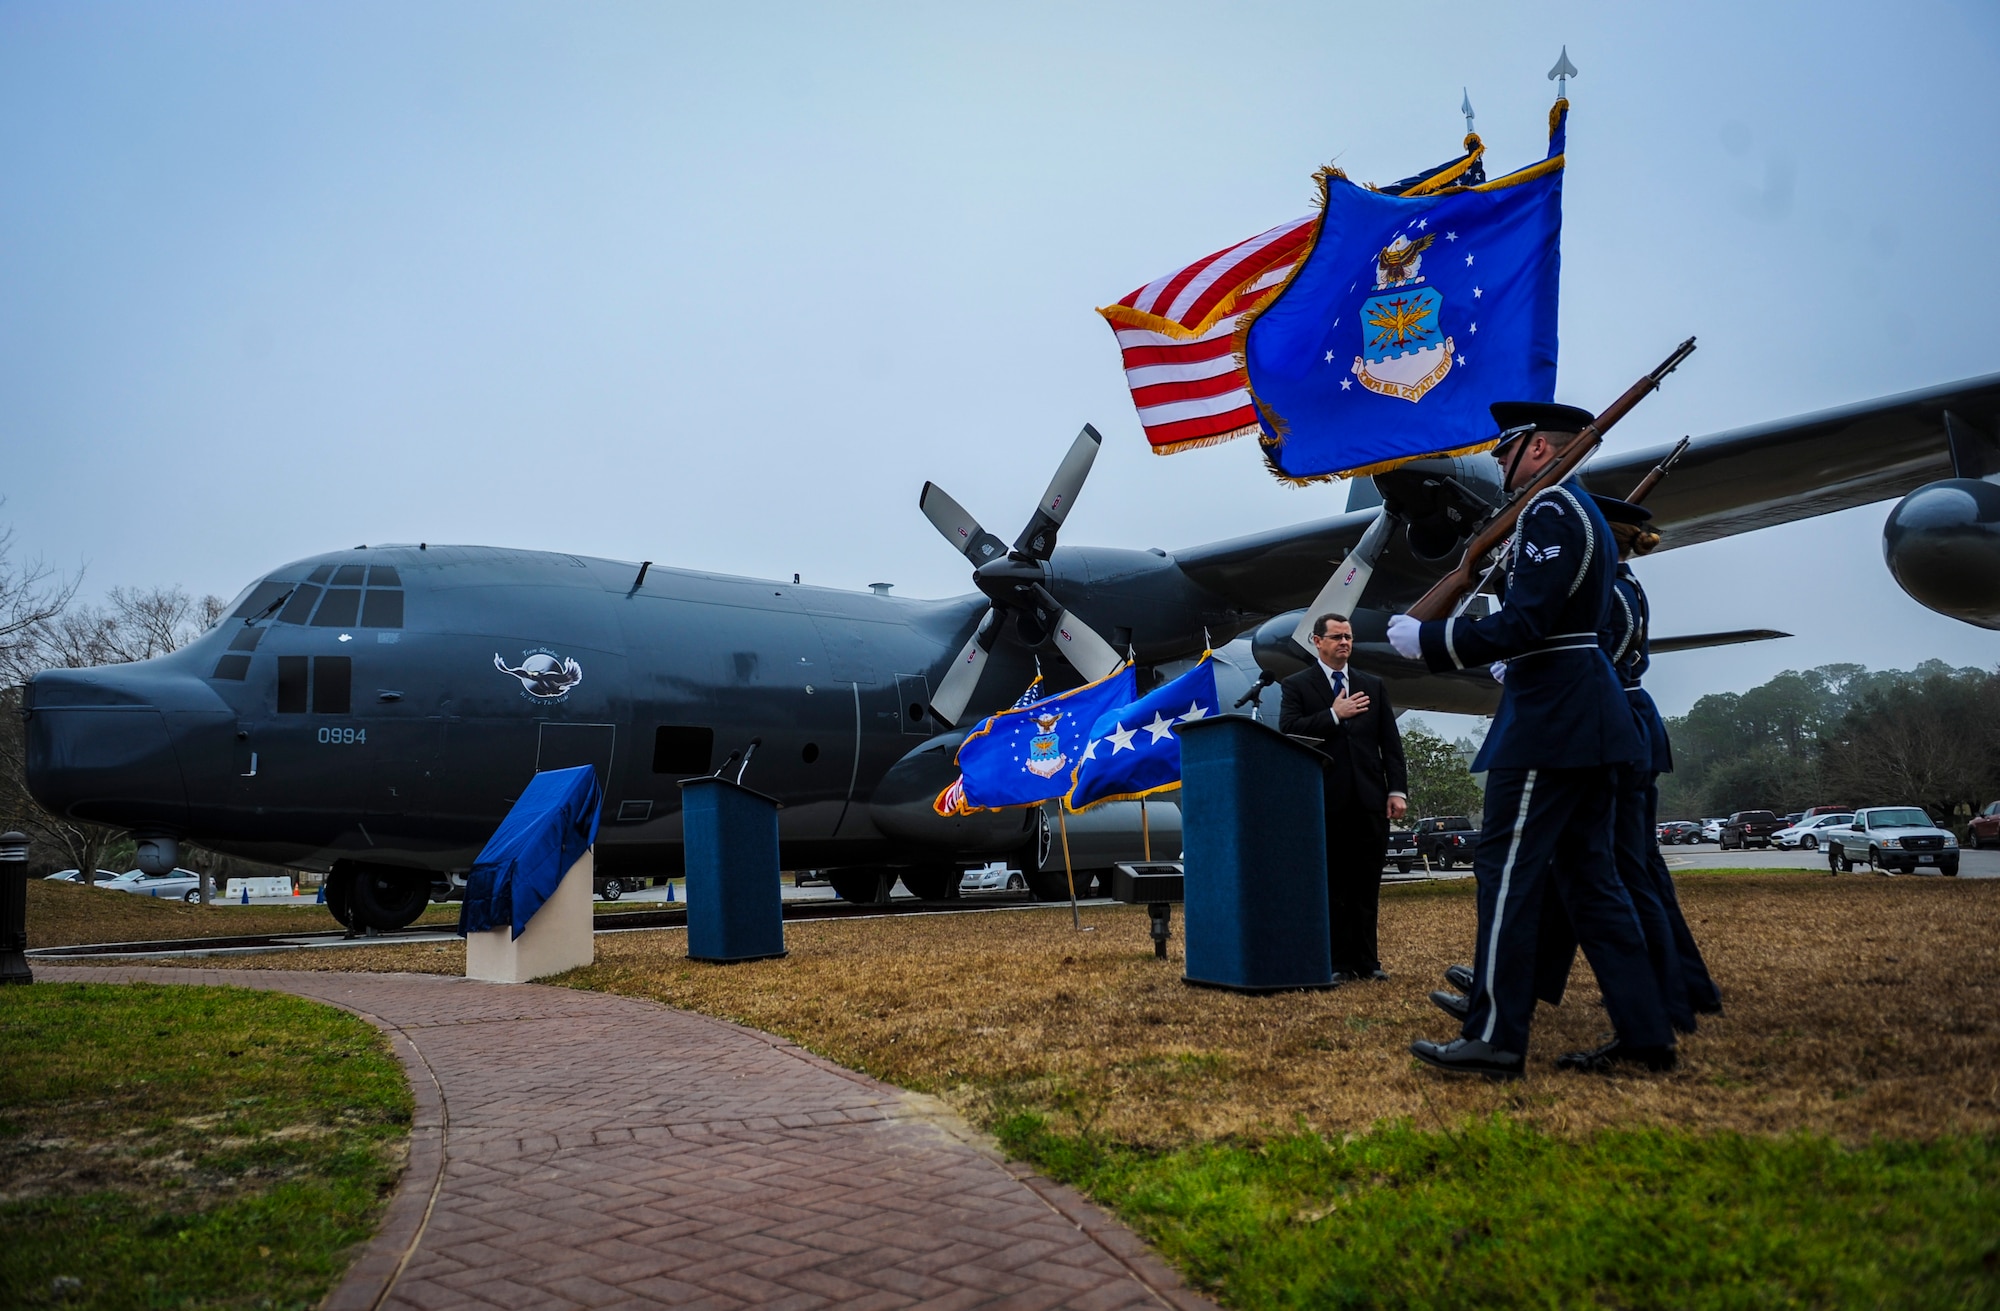 Hurlburt Field Base Honor Guard members present the colors before the MC-130P Combat Shadow dedication ceremony at Hurlburt Field, Fla., Feb. 2, 2016. More than 400 people attended the dedication ceremonies for the AC-130H Spectre and MC-130P Combat Shadow to honor the legacy of these aircraft at the air park.  As the aircraft retire, the Air Force and Air Force Special Operations Command modernize the fleet with the AC-130J Ghostrider and MC-130J Commando II. (U.S. Air Force photo by Senior Airman Meagan Schutter)